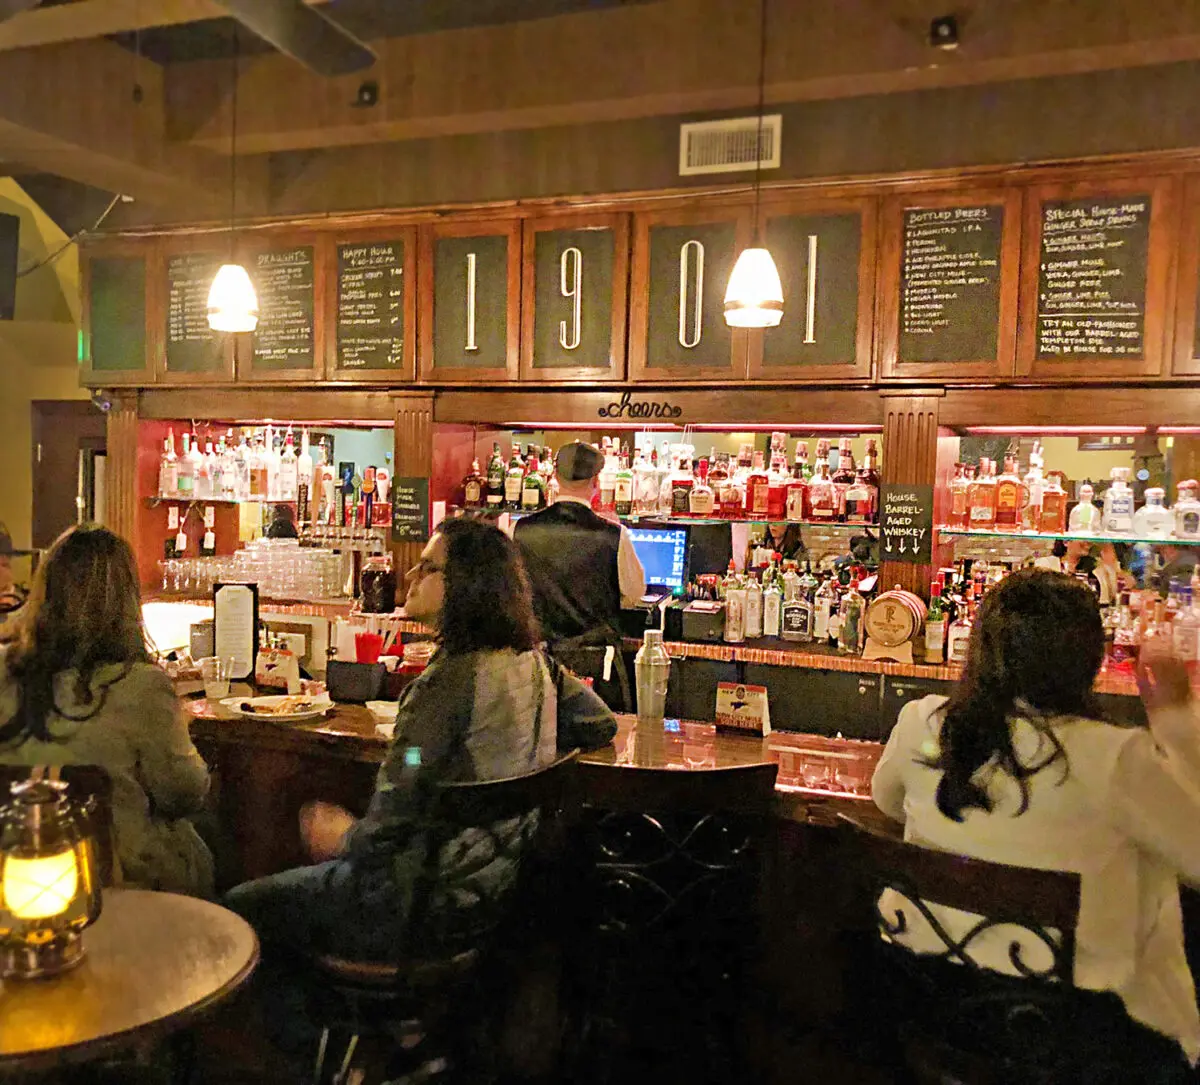 A cozy bar scene in Heritage Square with patrons seated, a bartender at work, and an array of liquor bottles displayed under a sign marked "1904".